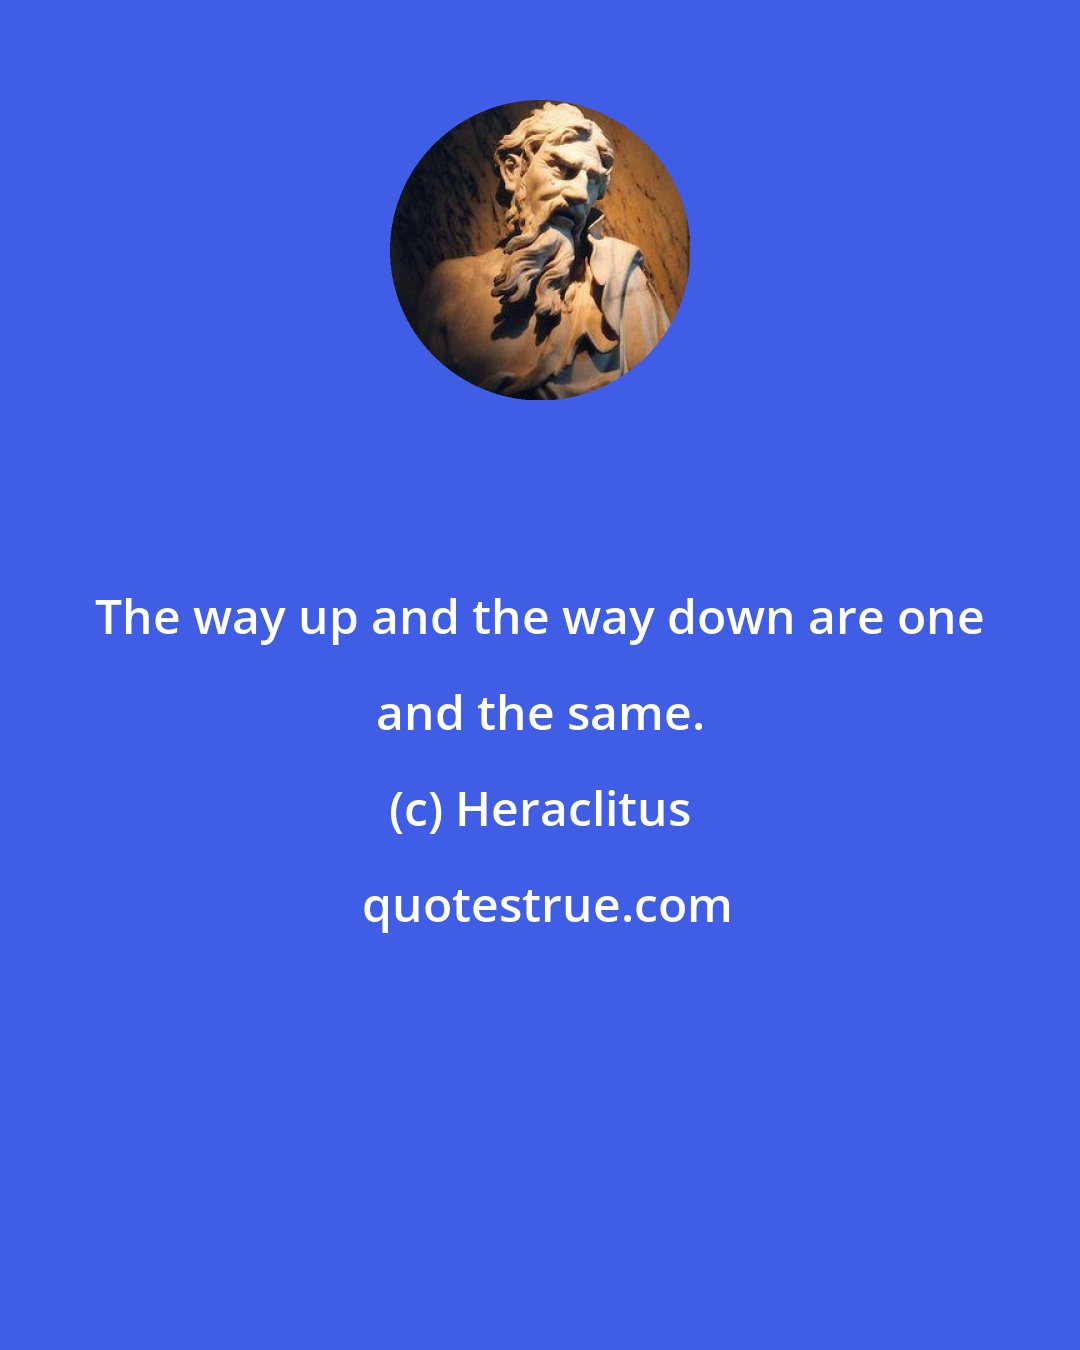 Heraclitus: The way up and the way down are one and the same.